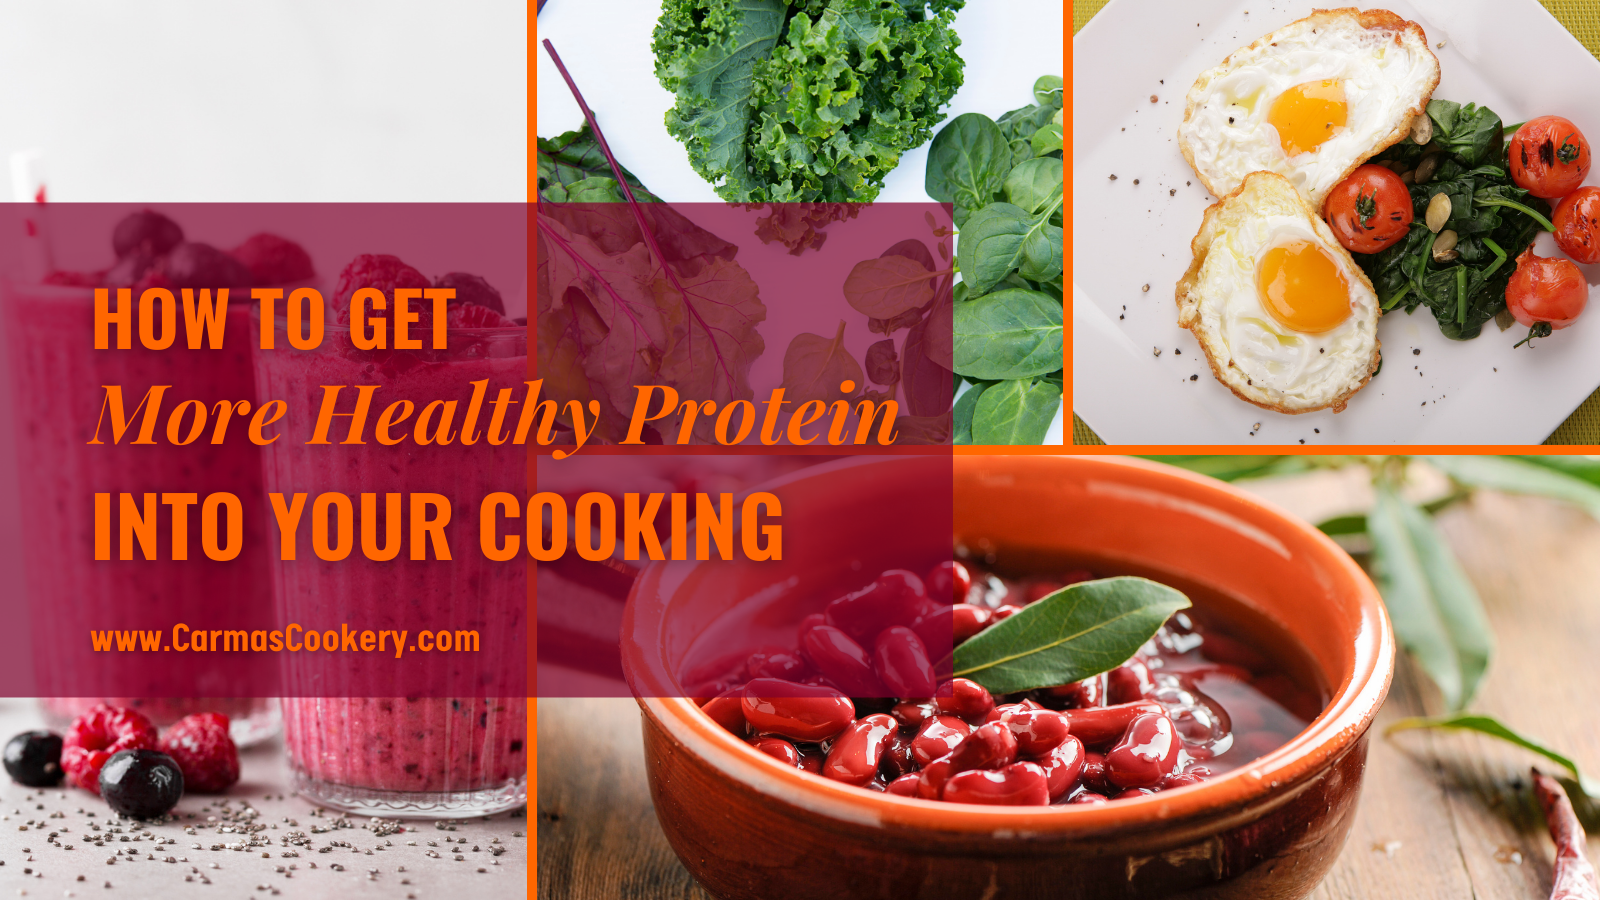 How to Get More Healthy Protein Into Your Cooking